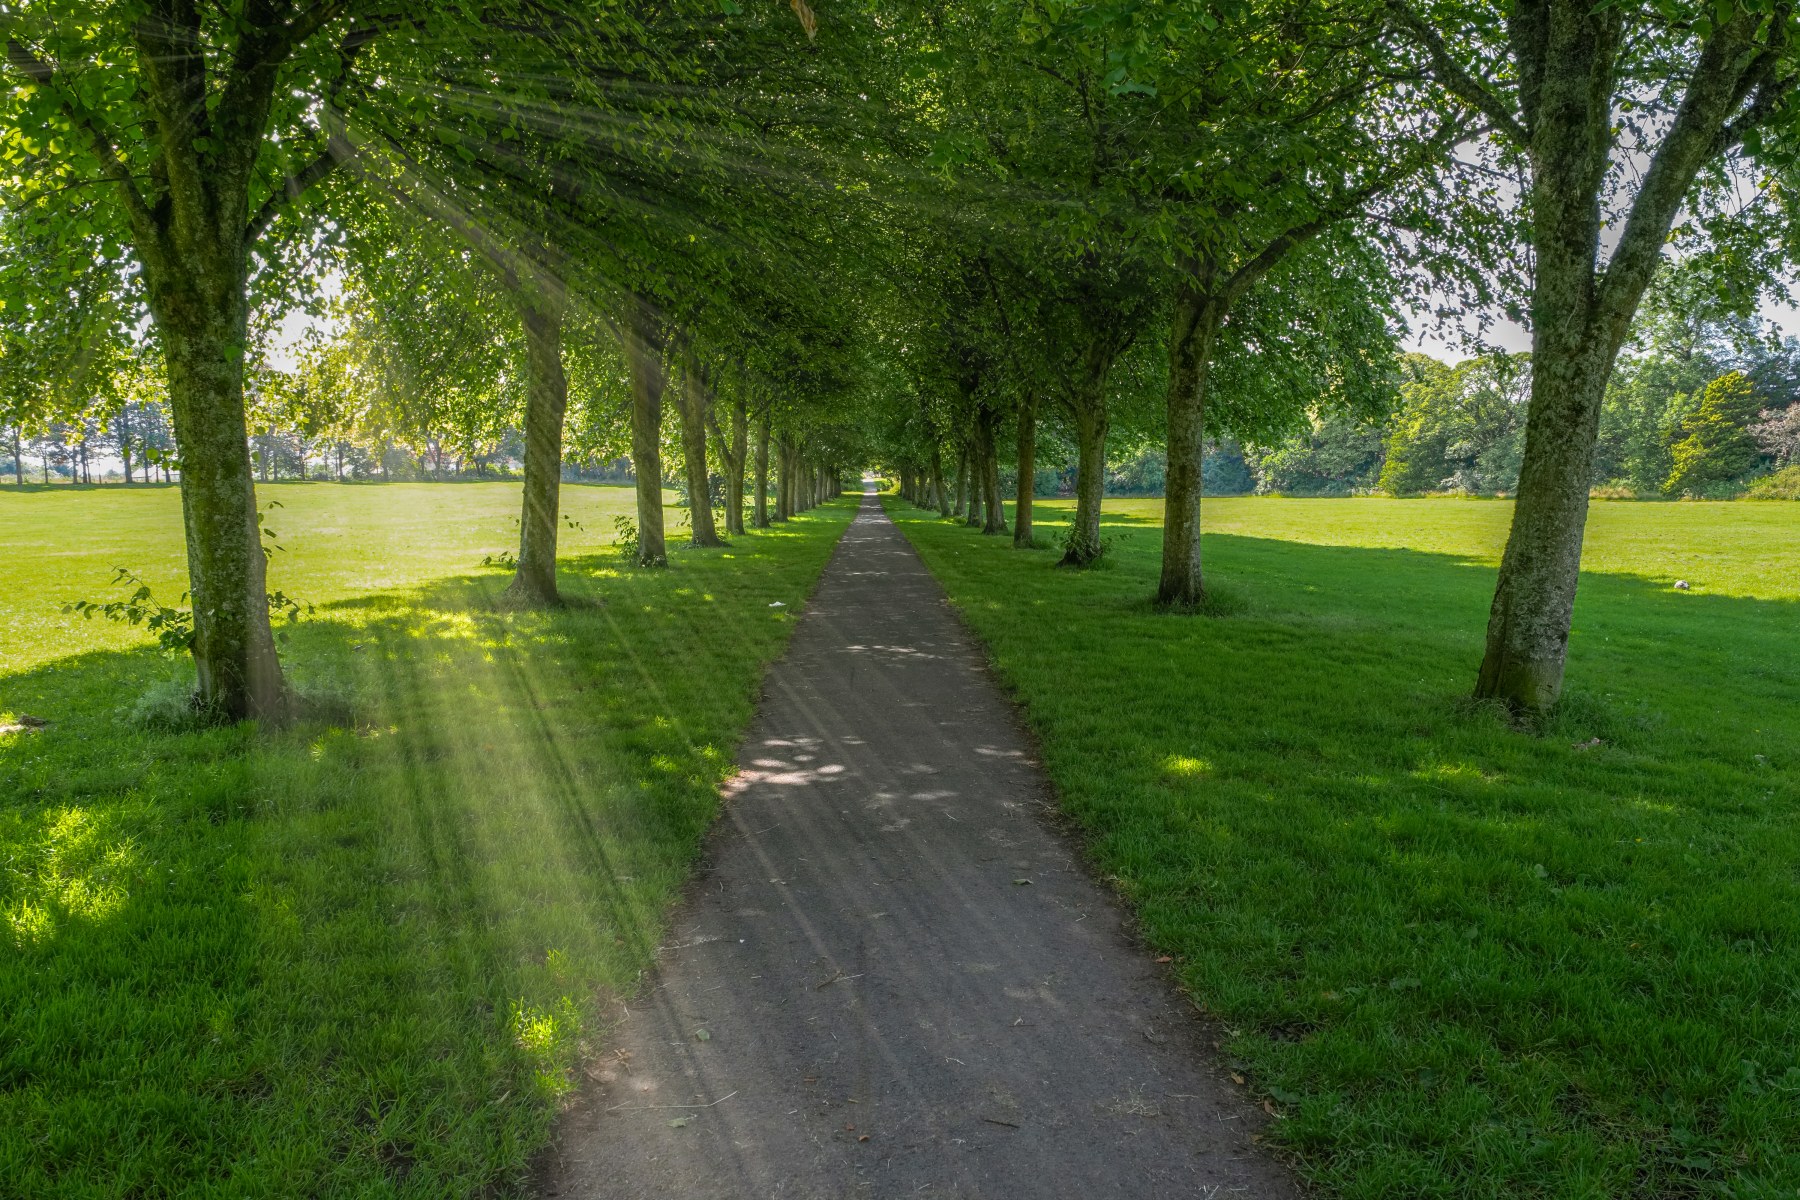 A tarmac path lined with trees in the middle of a path. The sunlight streams through the trees.